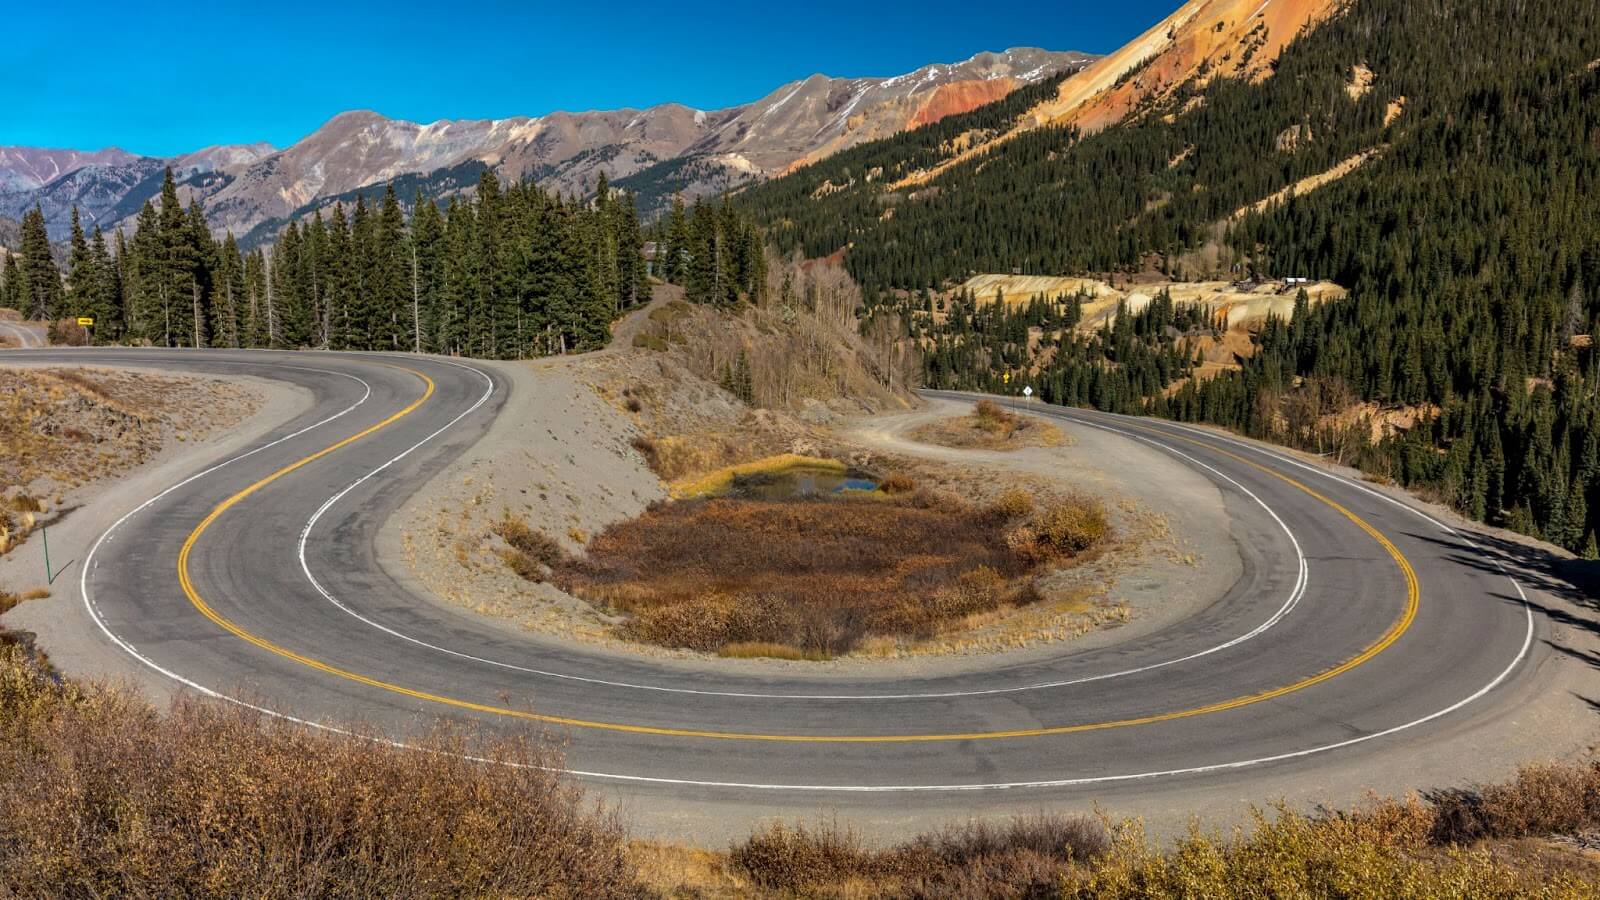 Millon Dollar Highway, one of the best driving roads in America